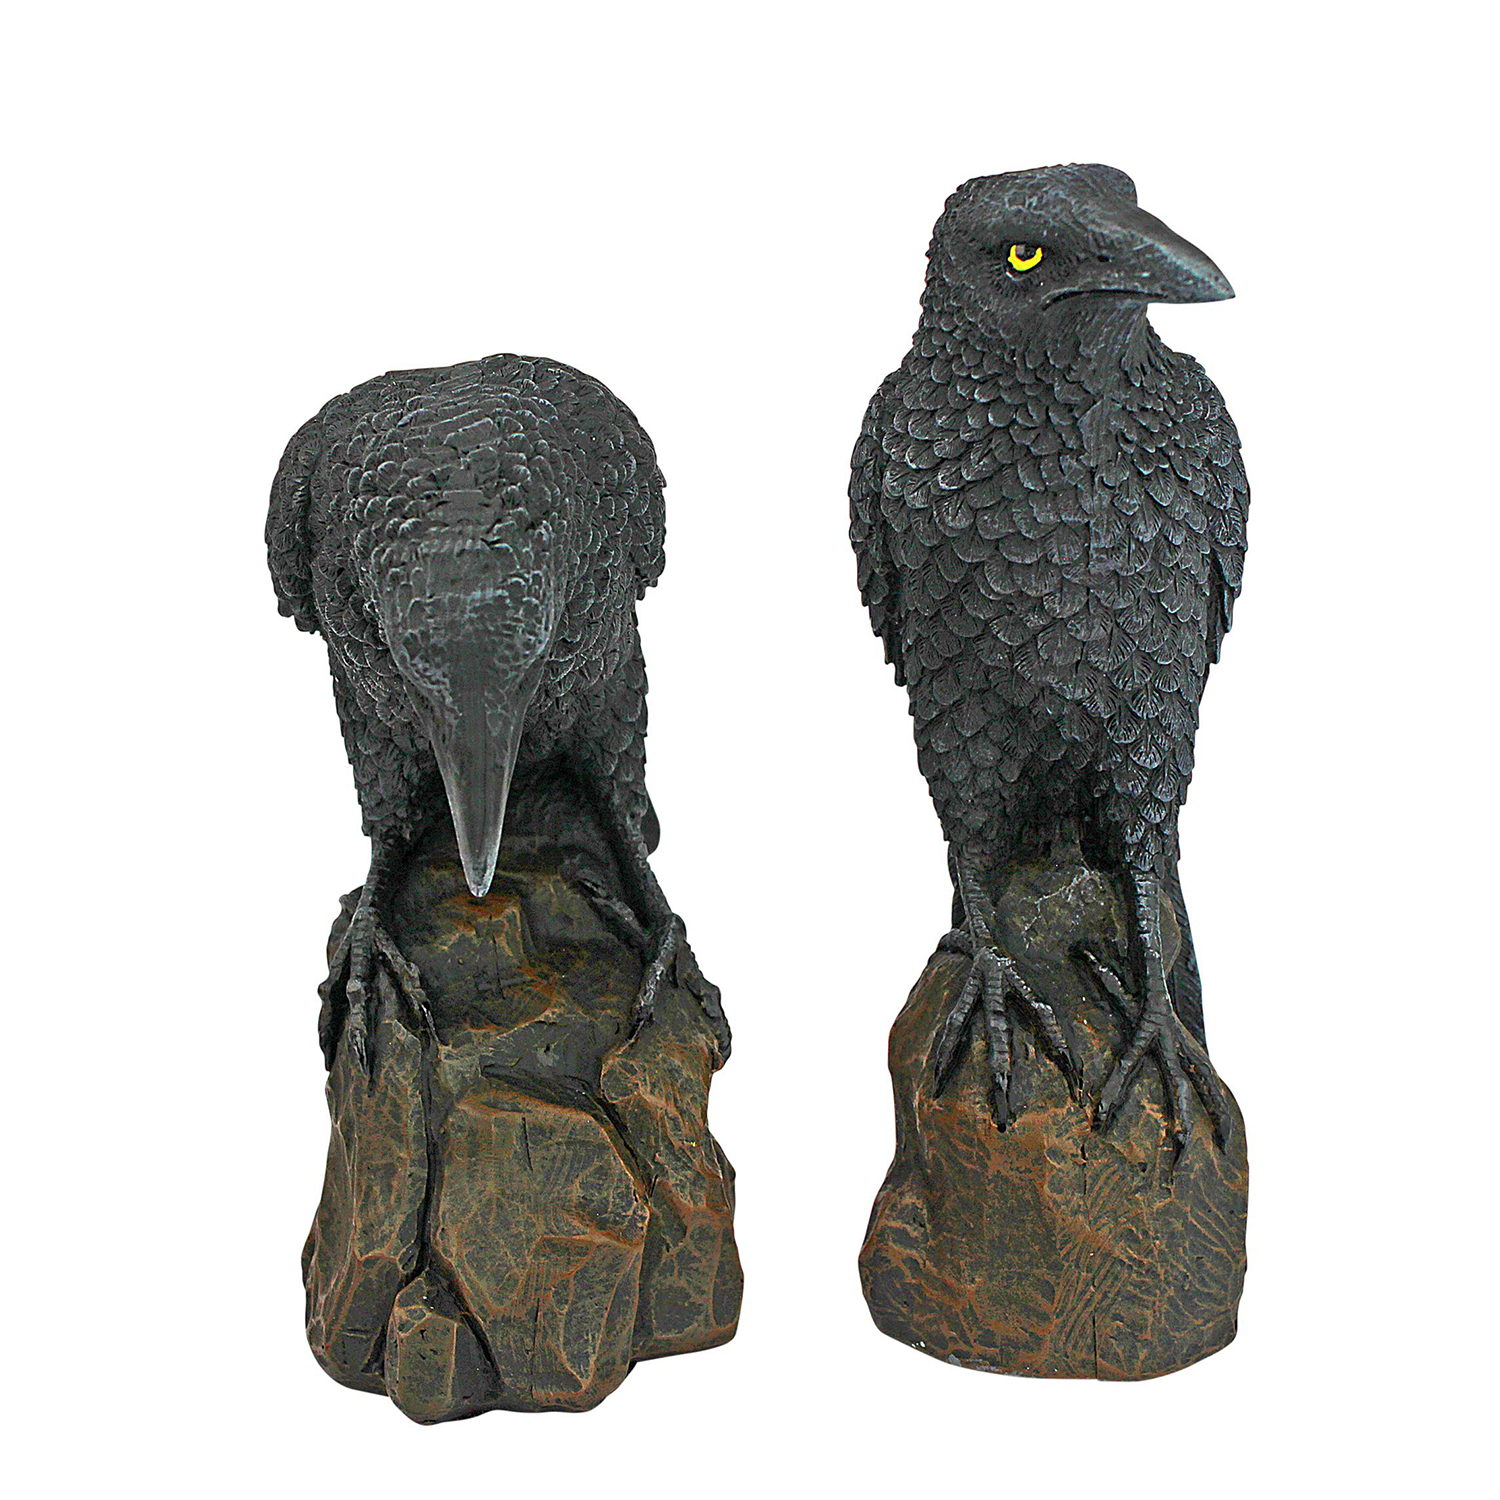 Raven Statues for Sale